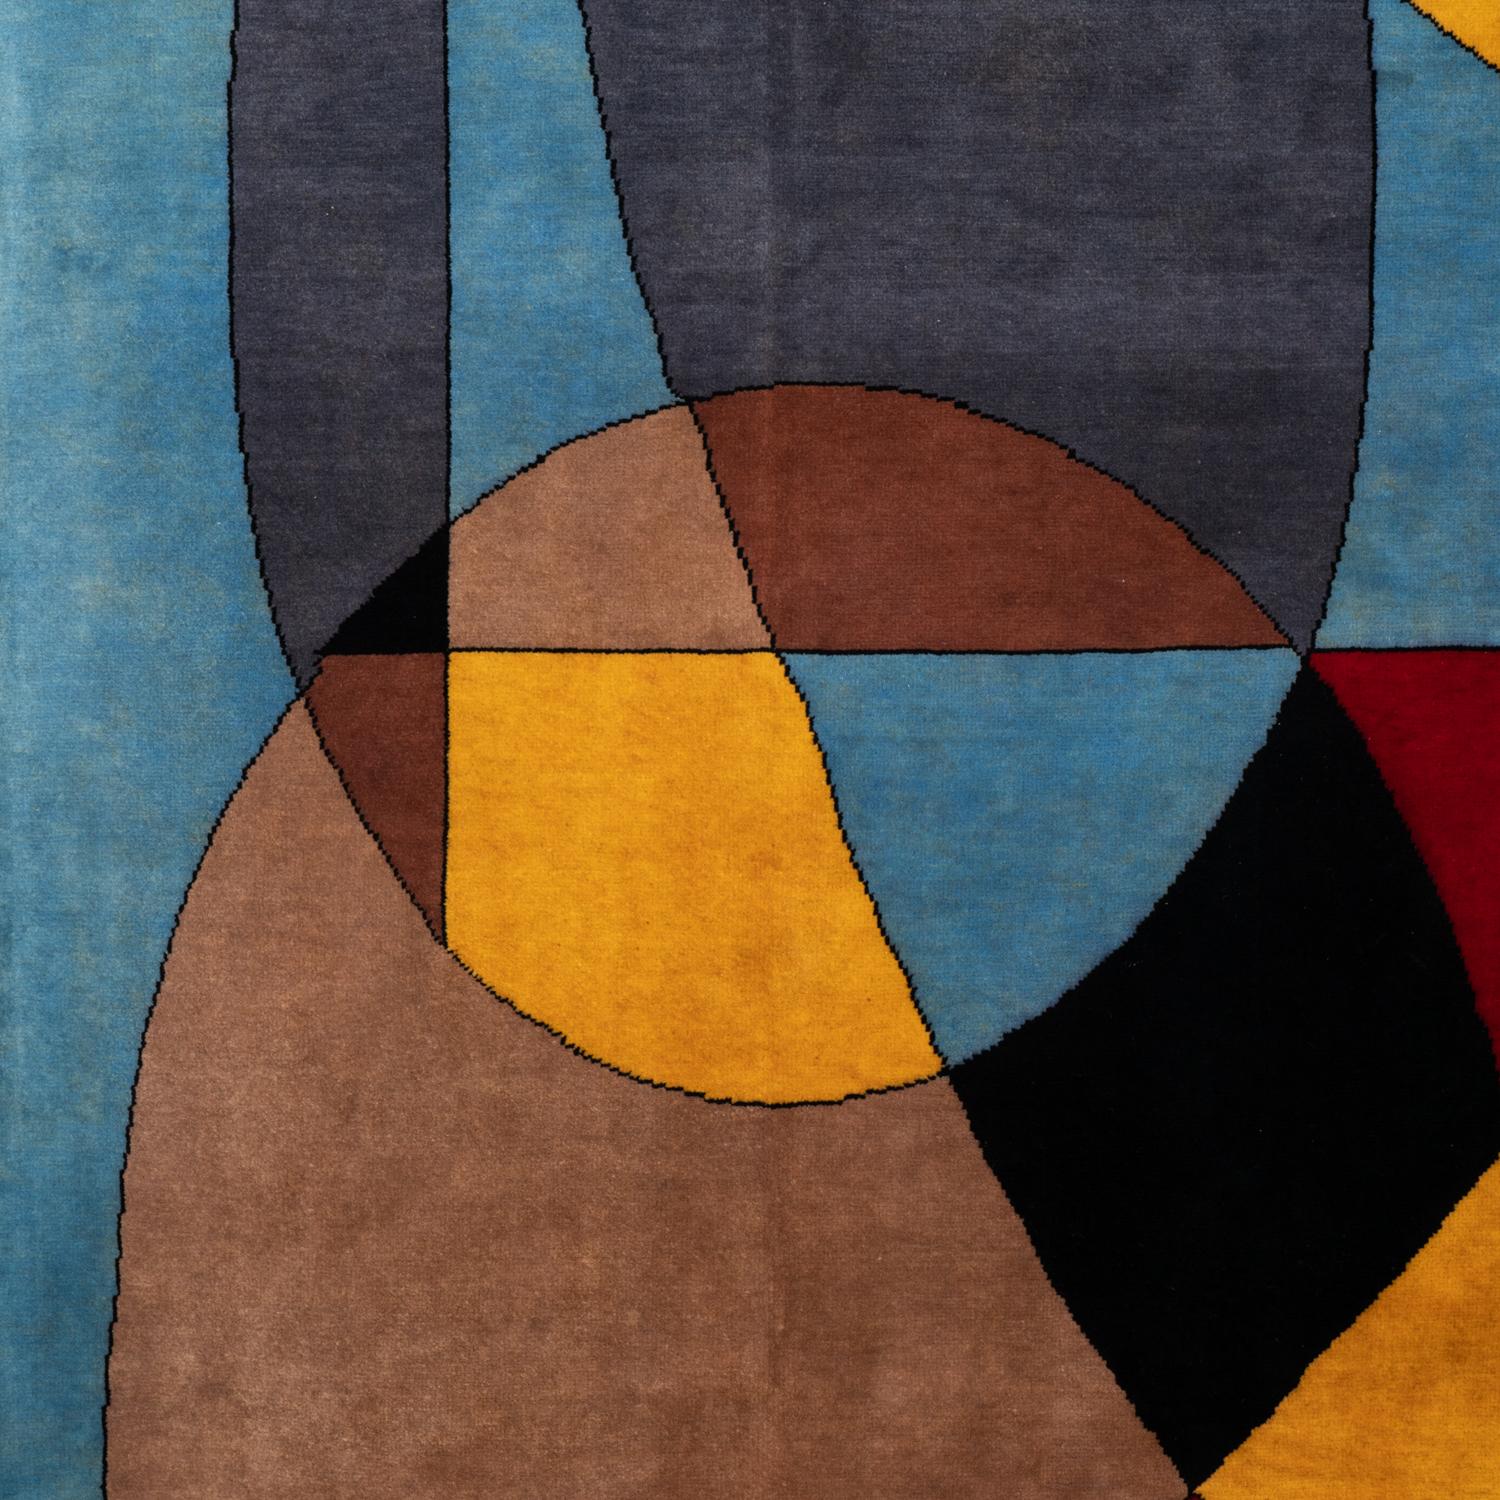 Rug, or tapestry, inspired by Robert Delaunay, abstract and geometric, in red, yellow and black on a blue background. Hand-knotted in Merino wool.

Contemporary craftsmanship.

Numbered 1/8. Area: 5 6 square meters. Density: 784 000 knots.

Comes